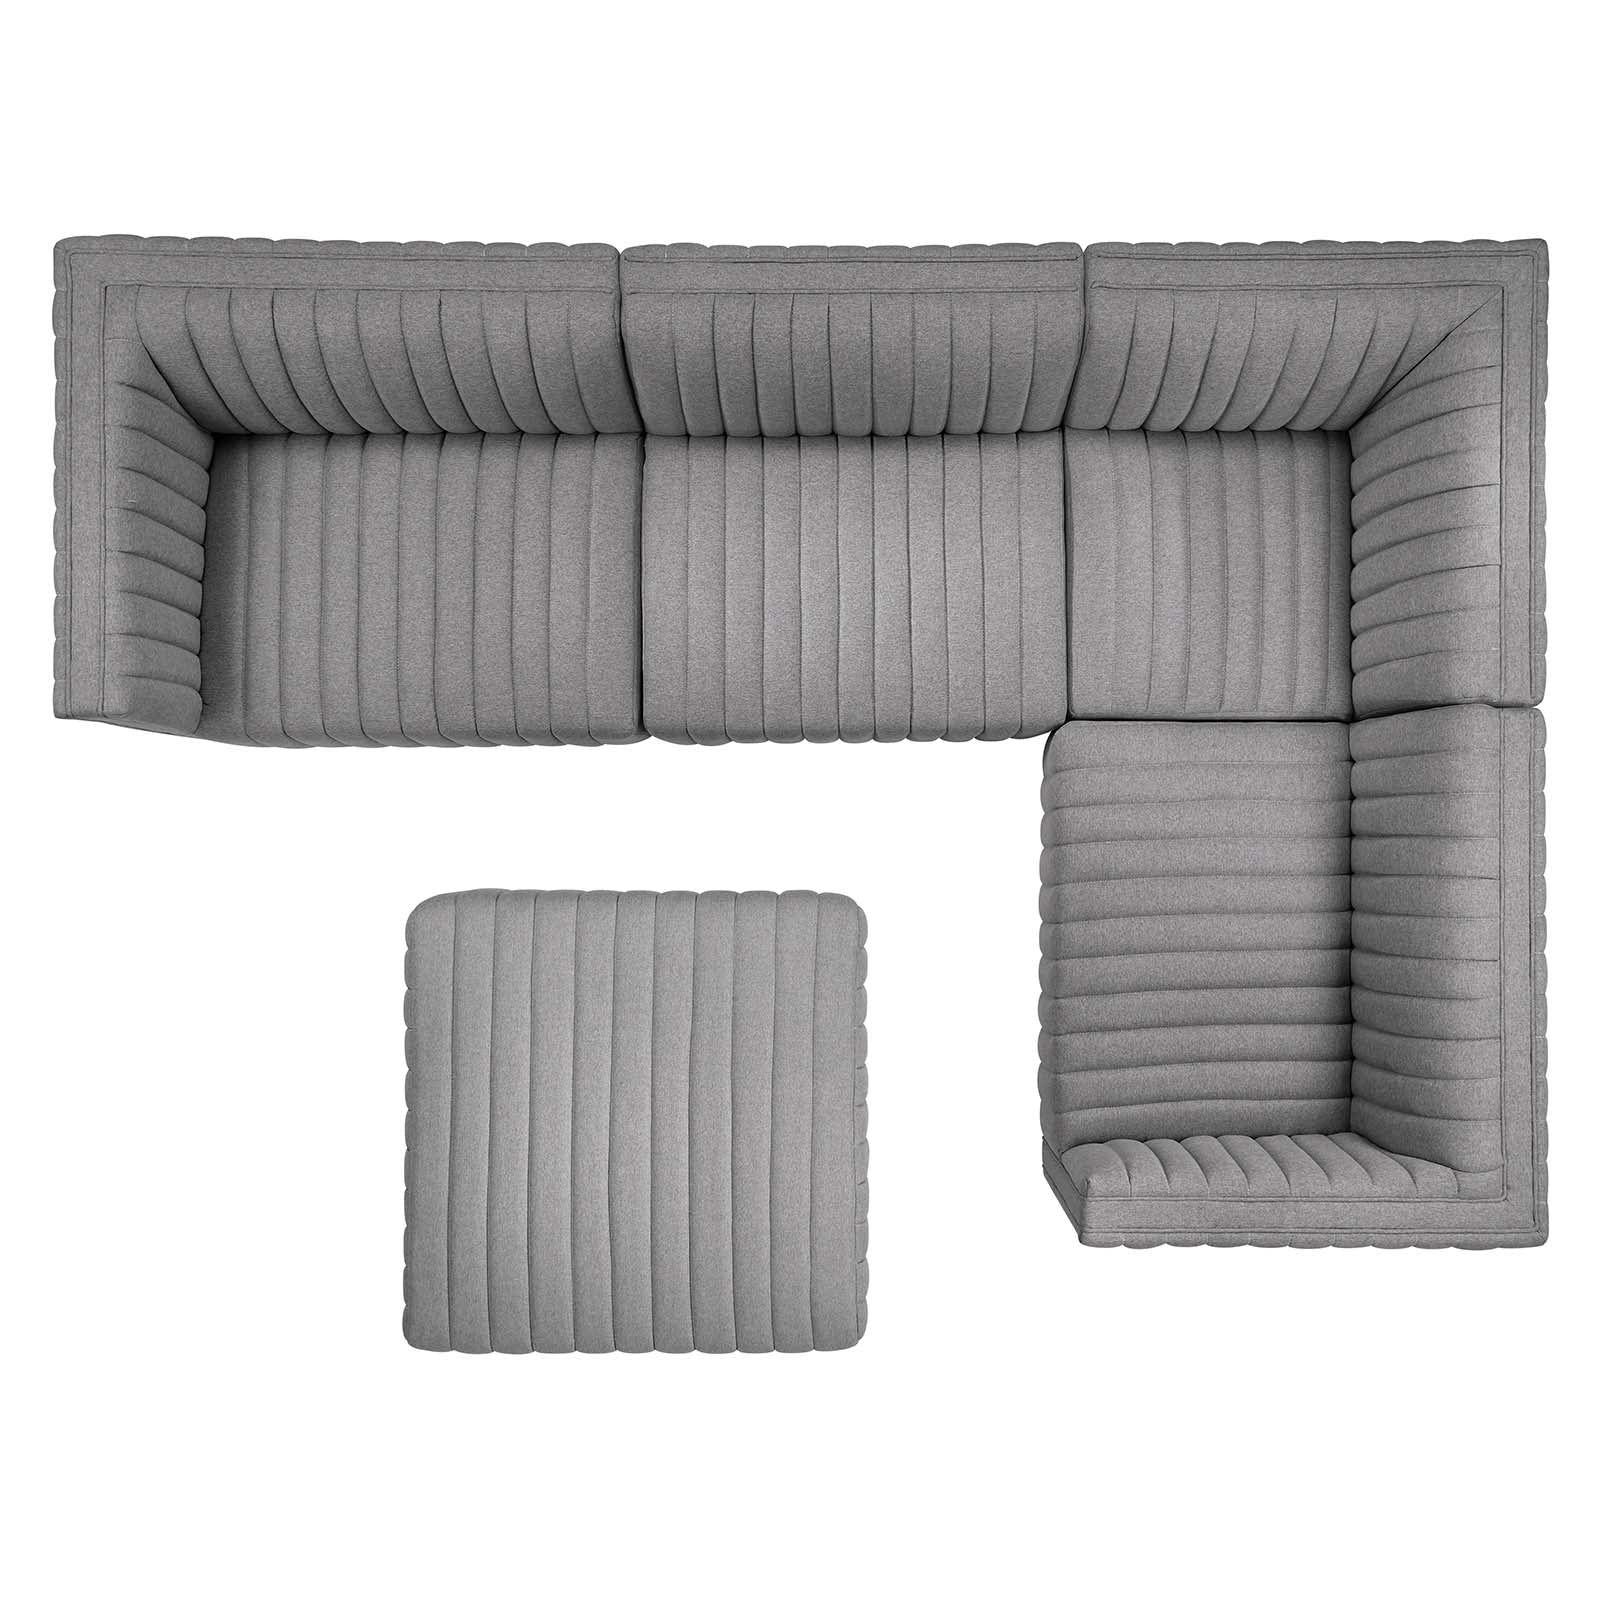 Modway Sectional Sofas - Conjure Channel Tufted Upholstered 119 " L Fabric 5-Piece Sectional Black Light Gray